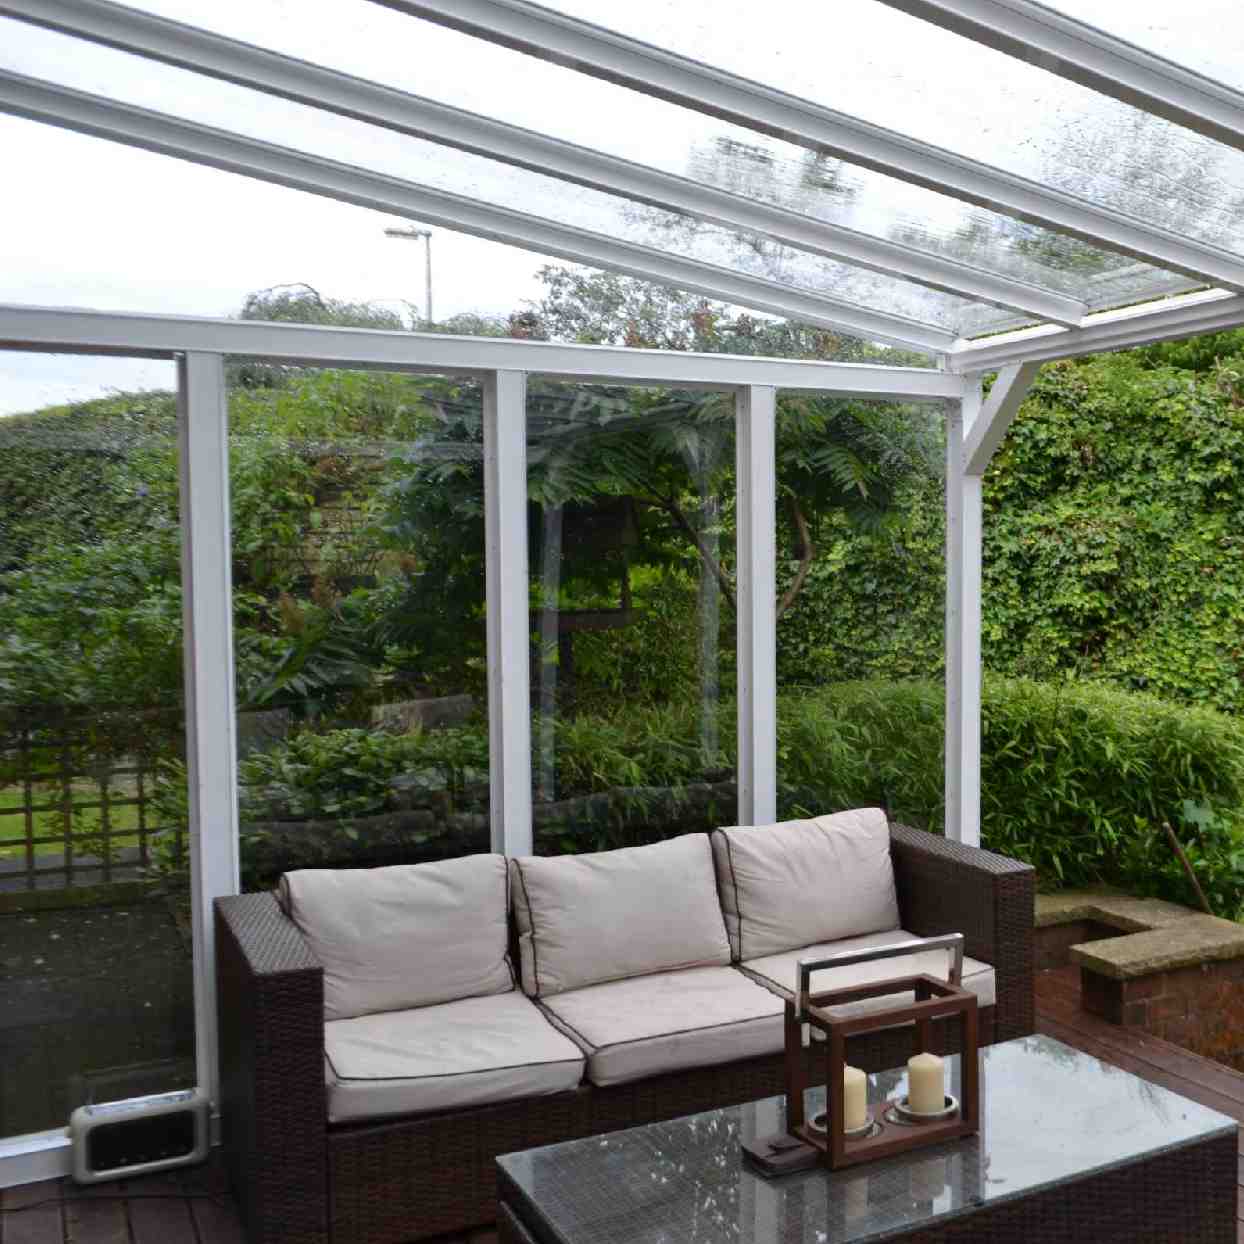 Buy Omega Verandah White with 16mm Polycarbonate Glazing - 5.2m (W) x 4.5m (P), (3) Supporting Posts online today